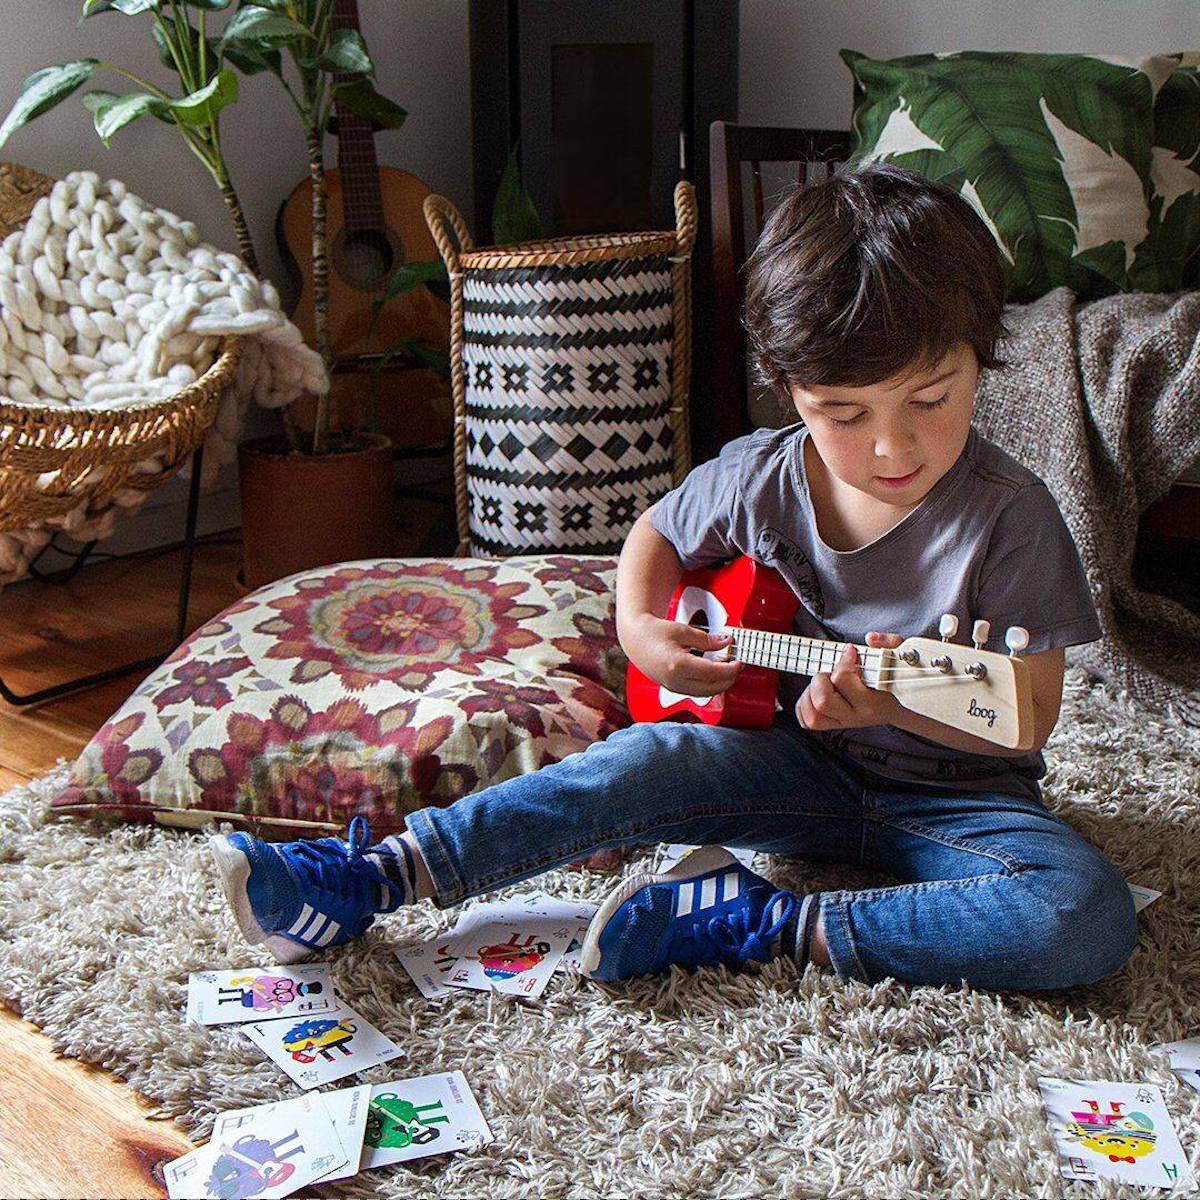 25 Awesome Amazon Toys For Kids To Kickstart Your Holiday Shopping